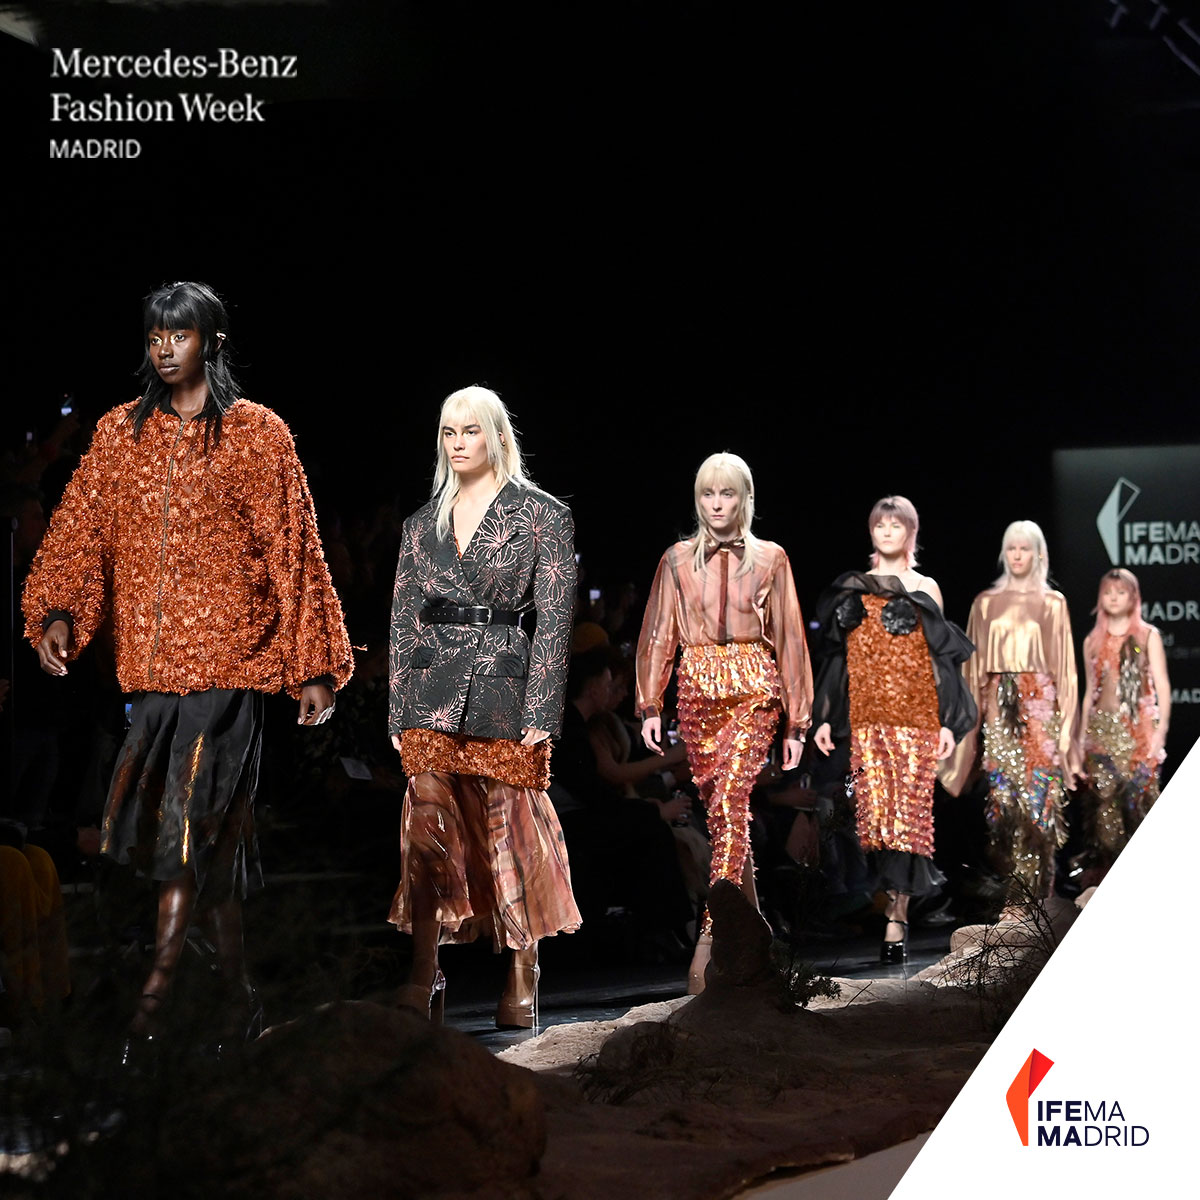 In February, the Spanish capital dressed up to host a new edition of #MBFWMadrid.

We saw an incredible display of creativity and innovation from iconic fashion houses and emerging brands alike. Did you catch the show? Tell us what you thought!